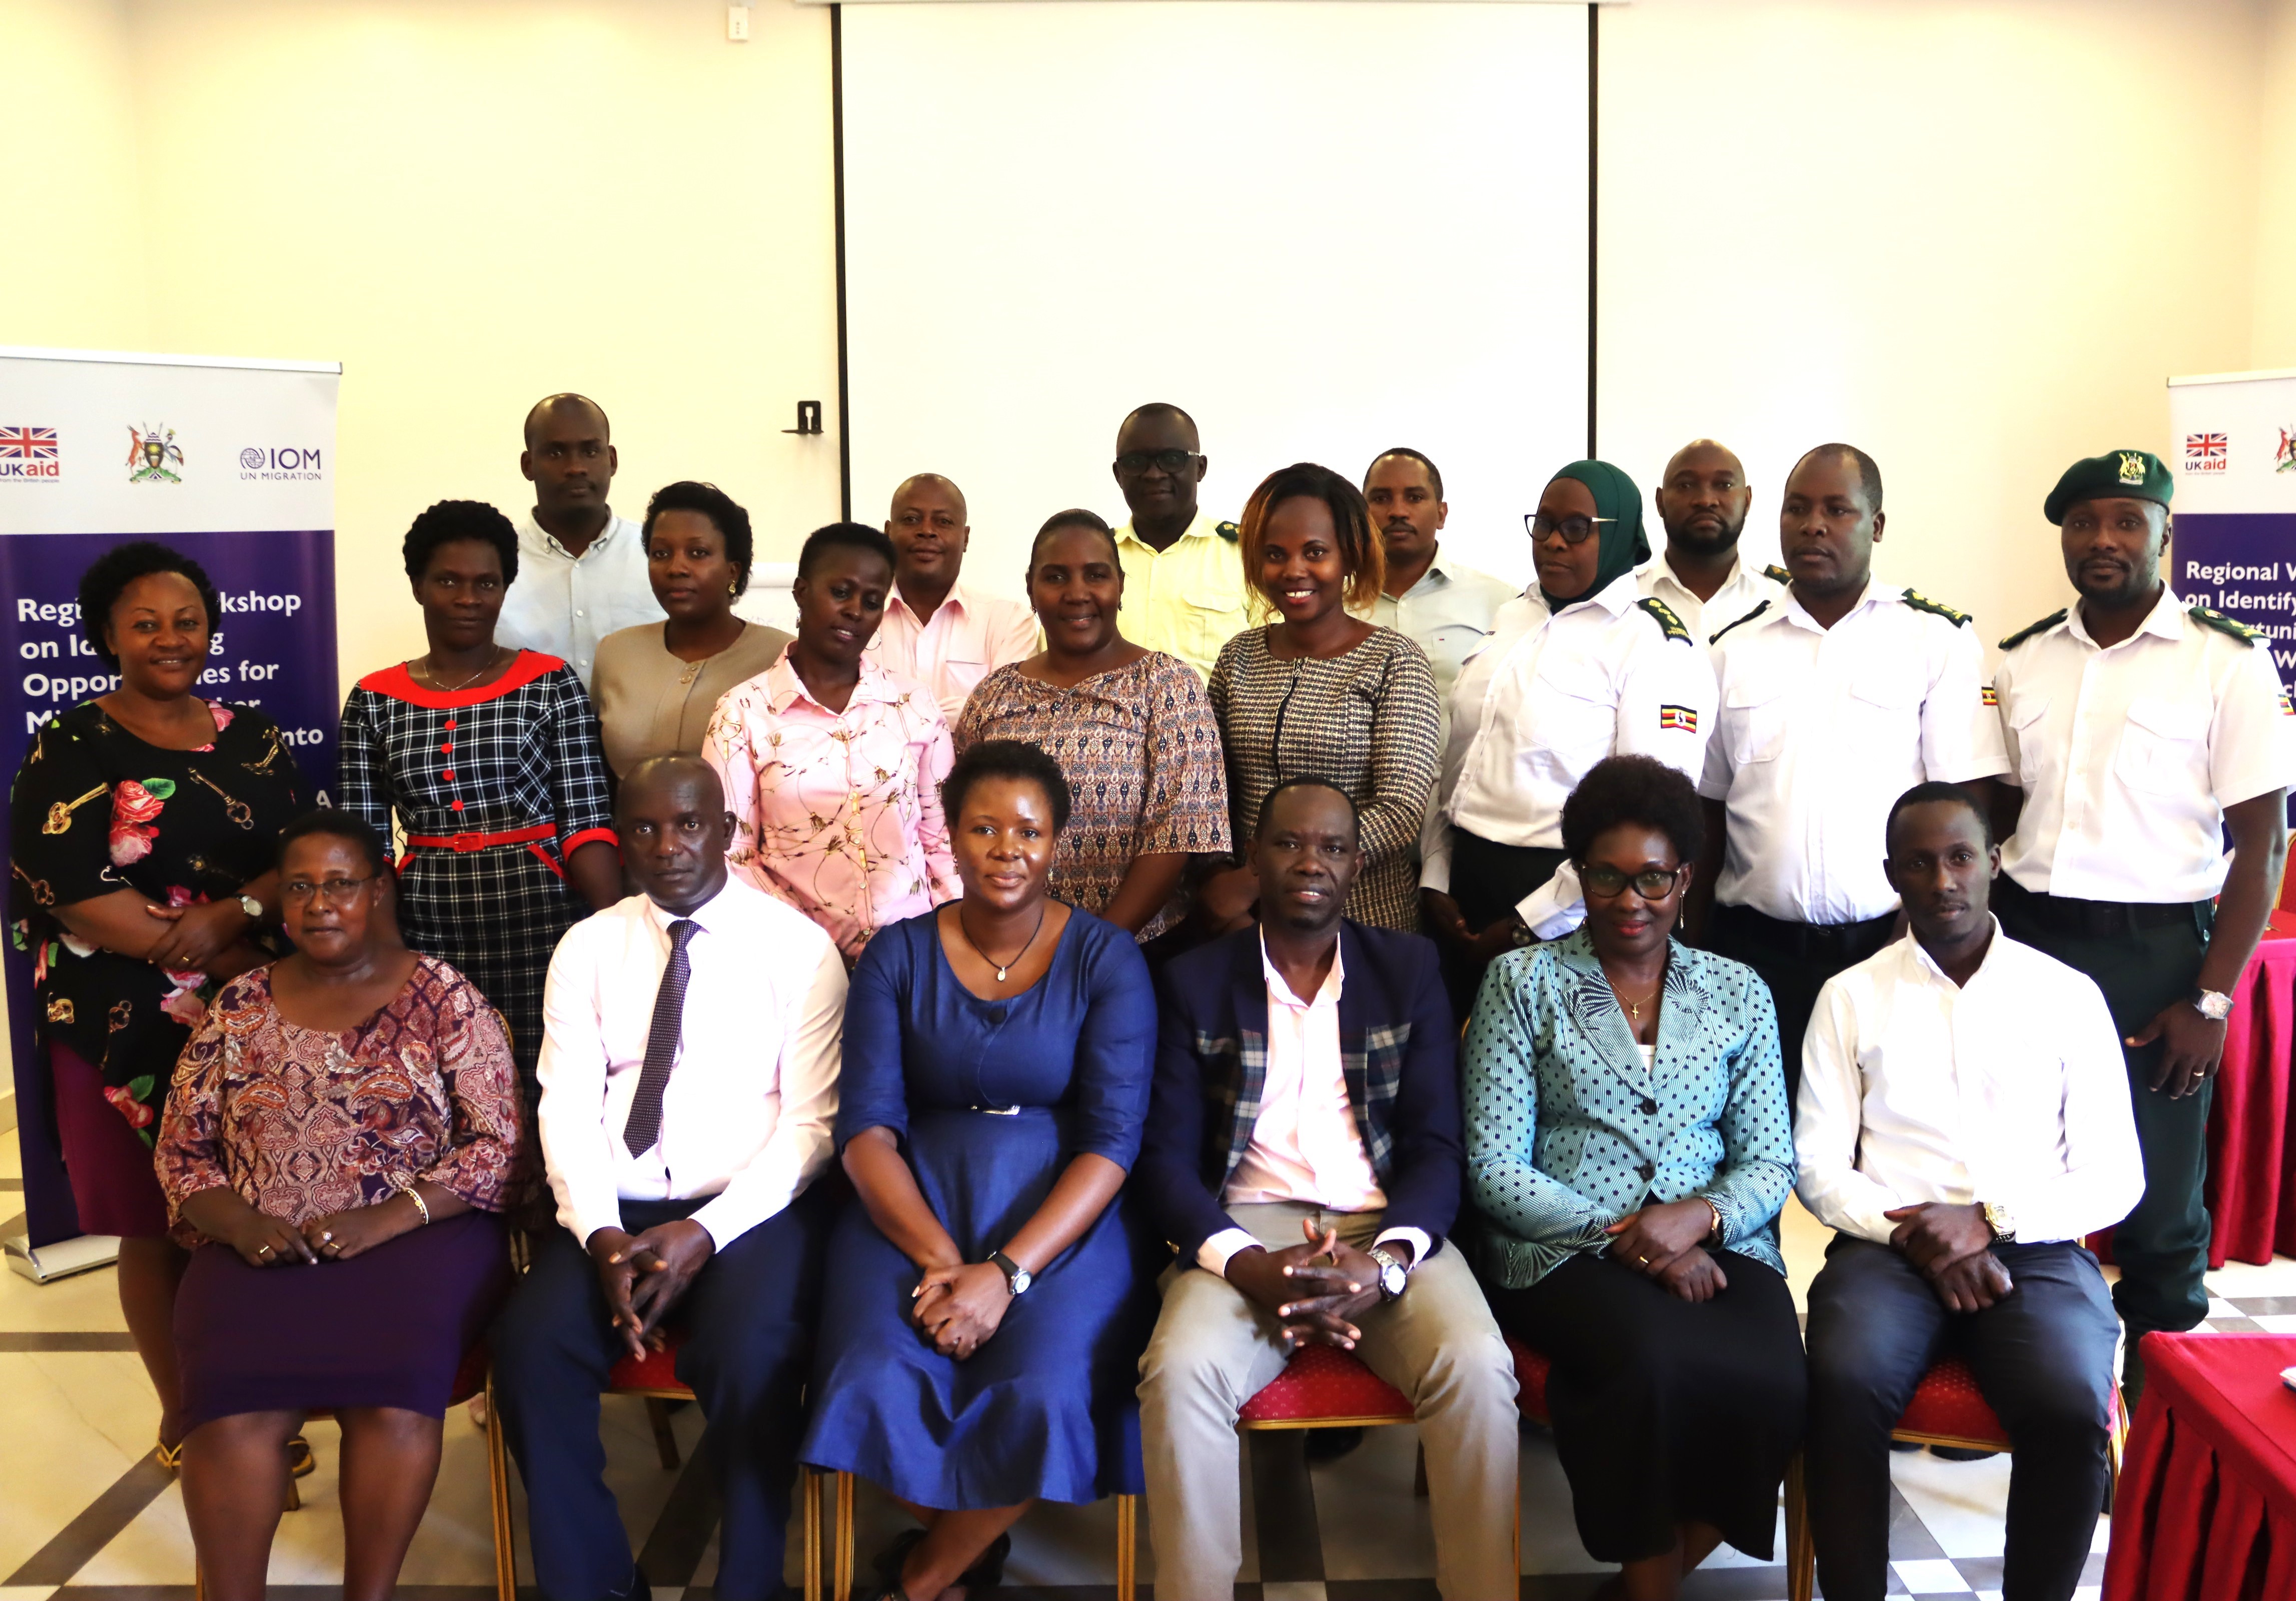 A group photo of the training participants in Entebbe